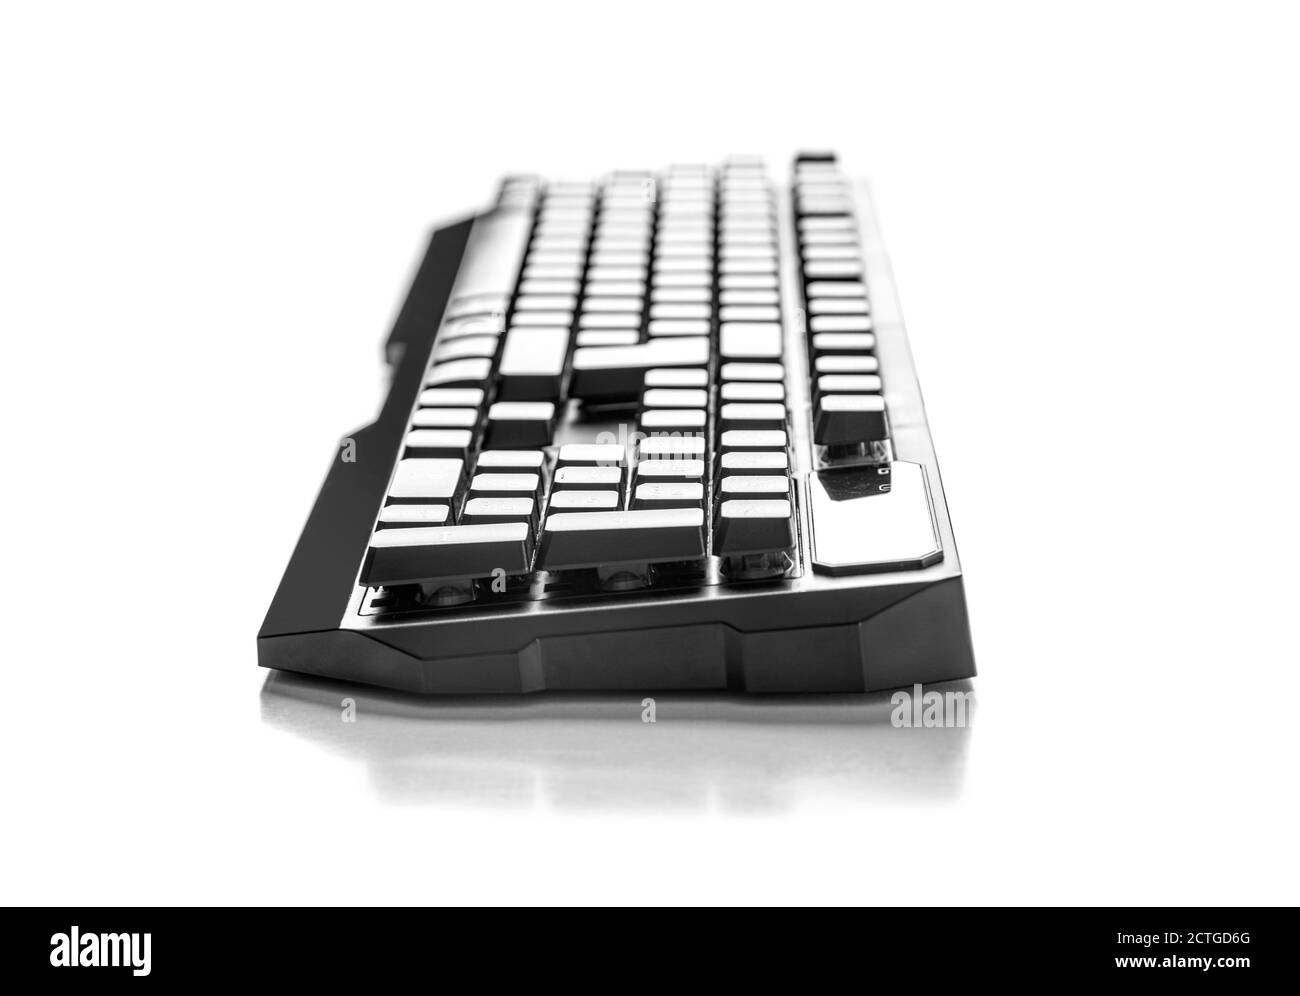 Computer keyboard isolated on the white background. Stock Photo